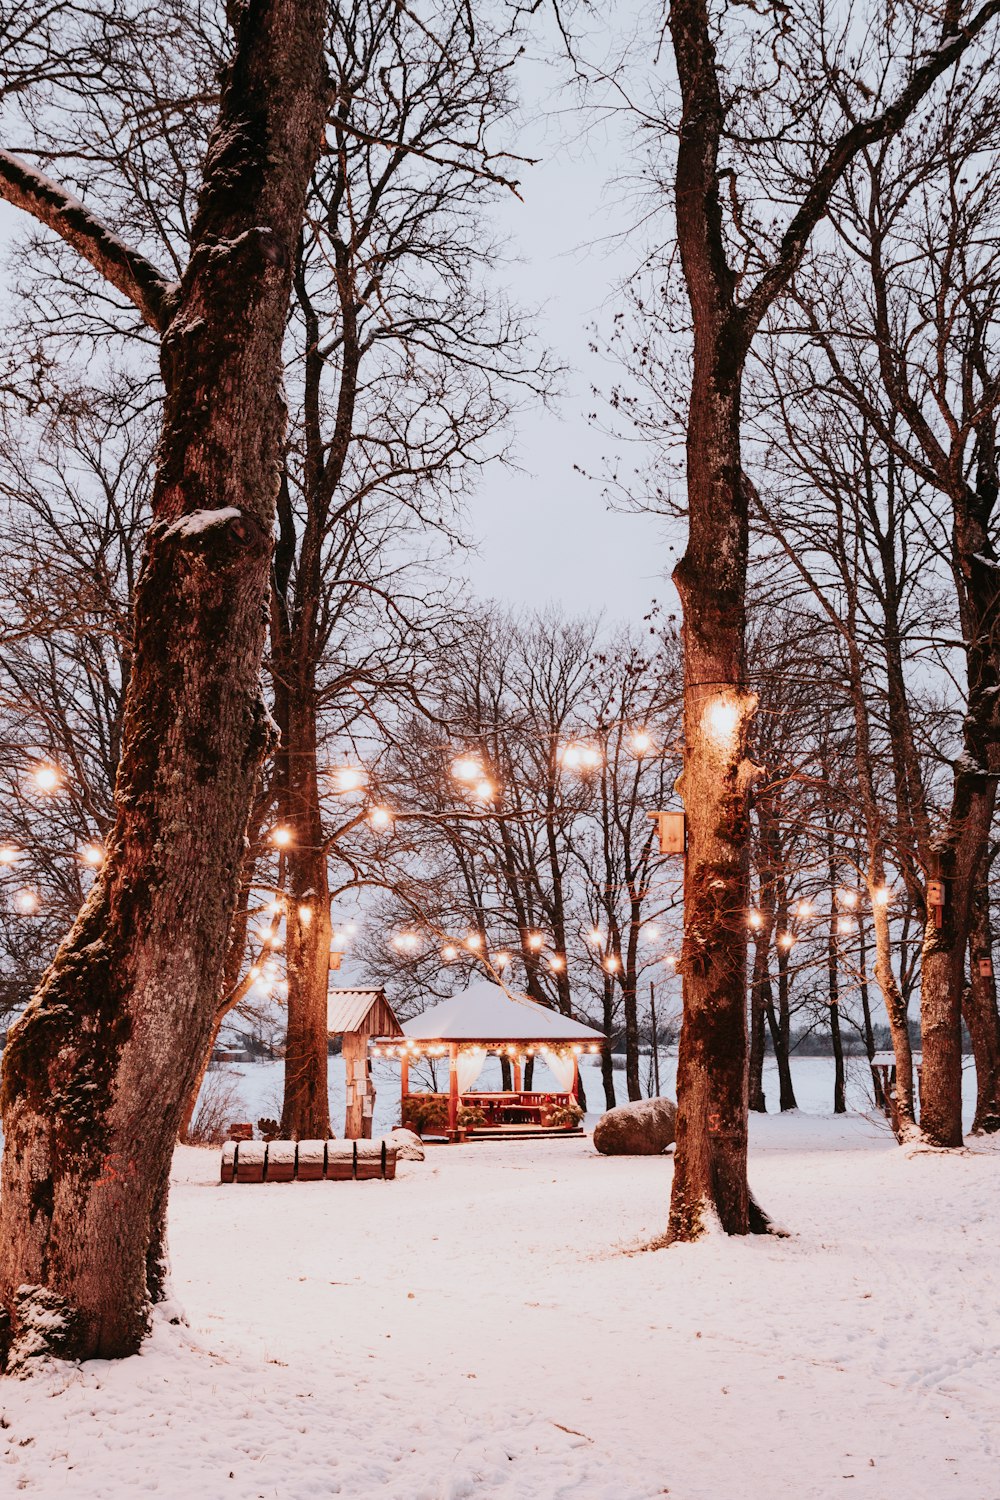 a snowy park with benches and lights